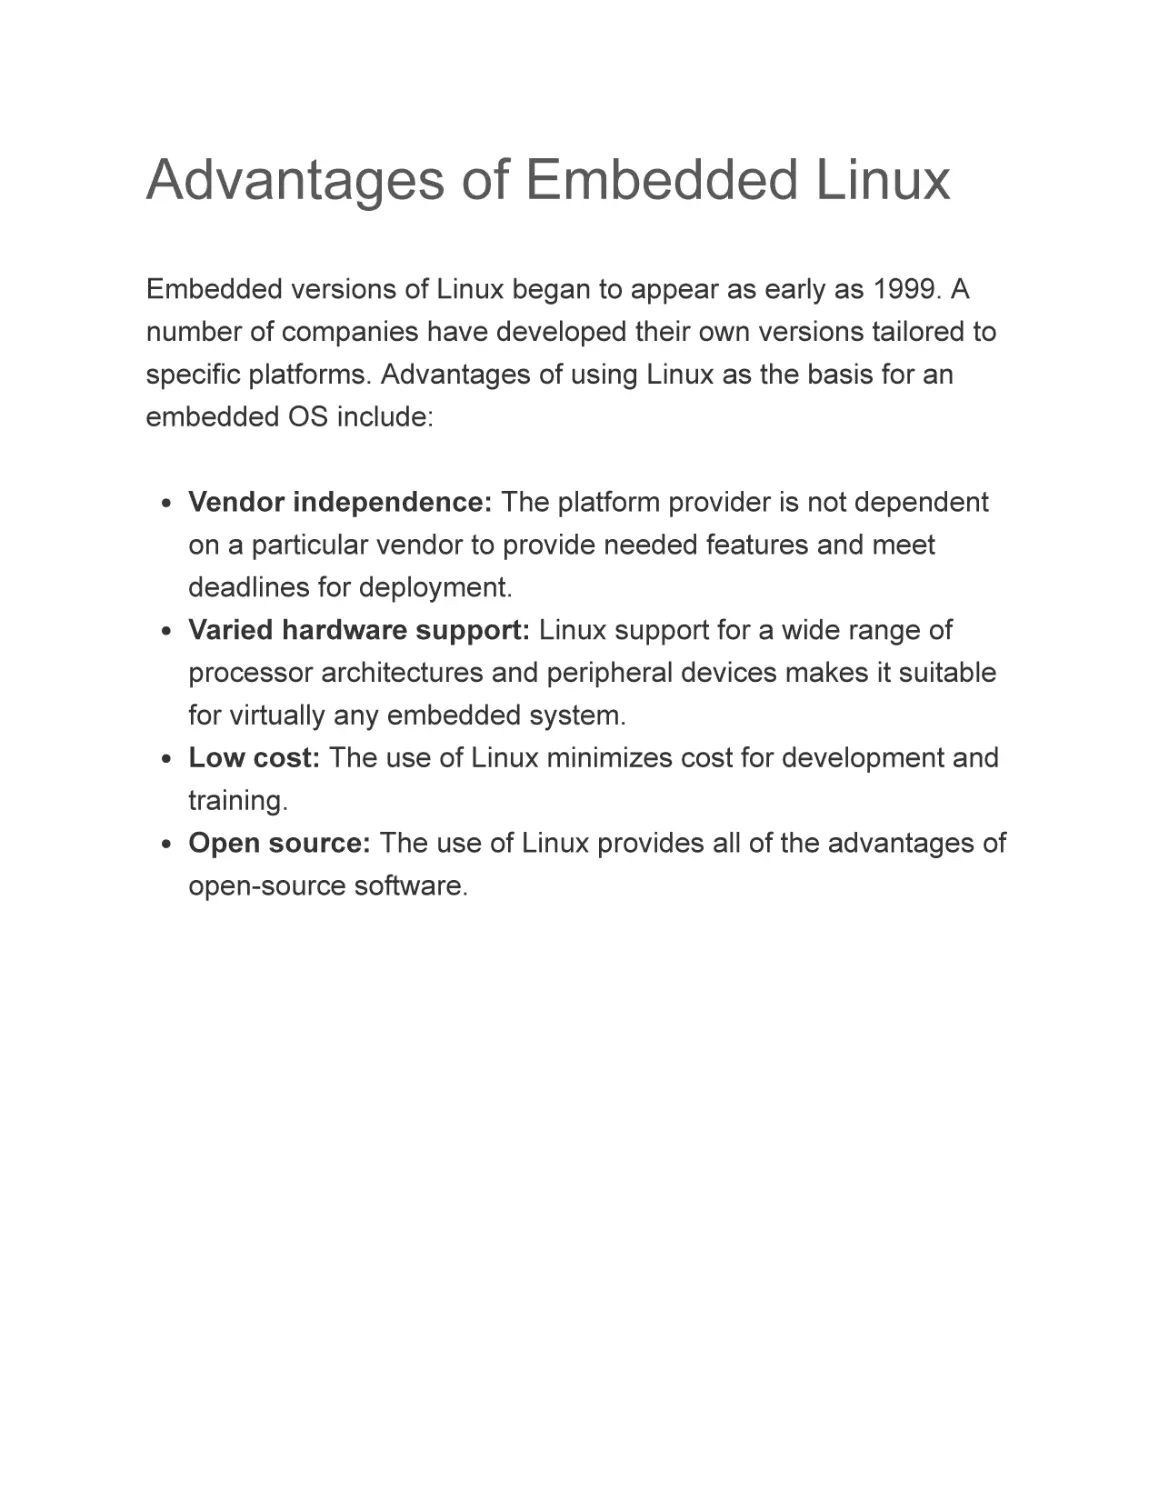 Advantages of Embedded Linux